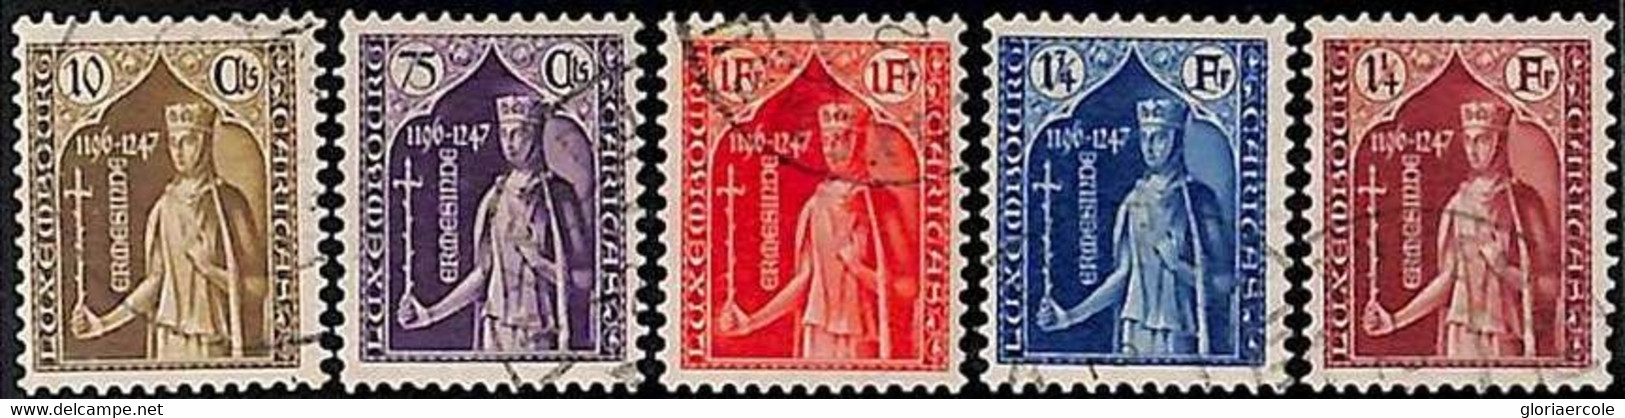 94917a  - LUXEMBOURG  - STAMPS  -  Yvert # 239 / 243 -  Very Fine USED - 1882 Allégorie